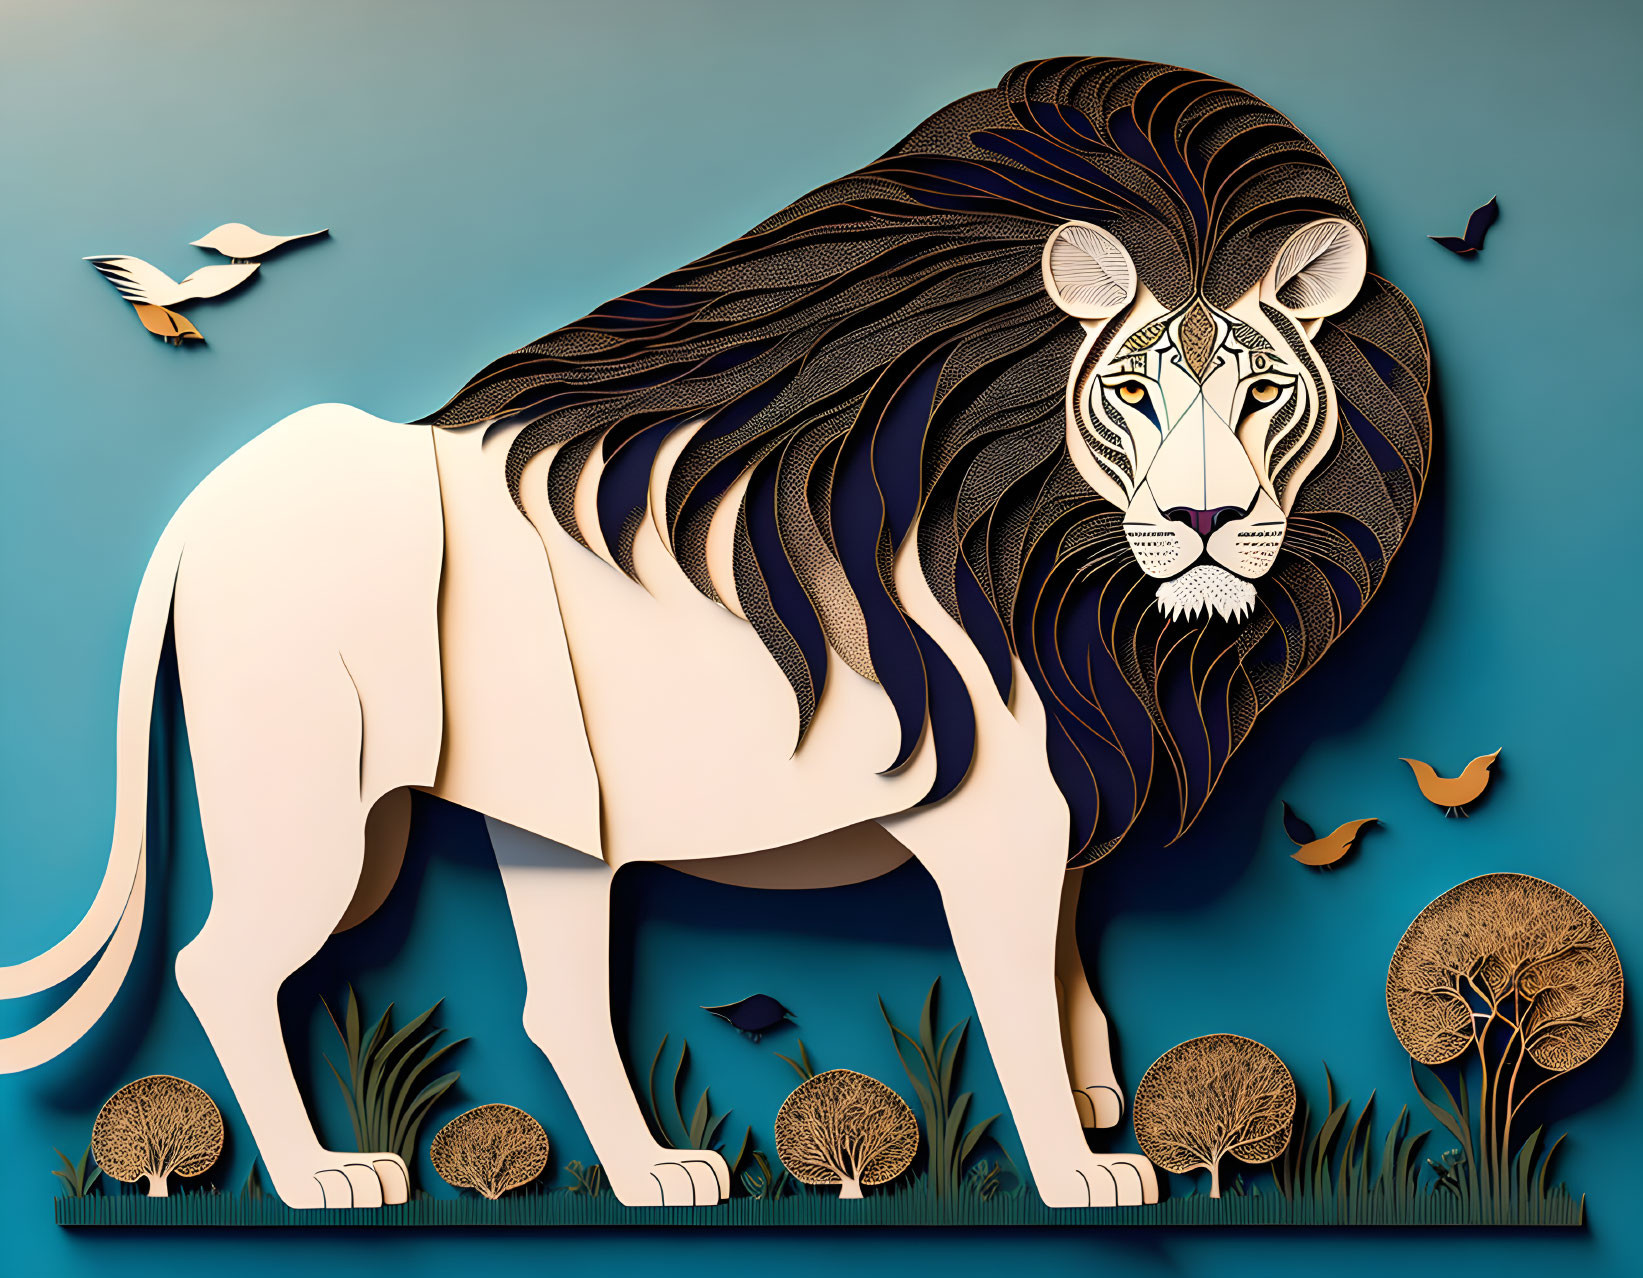 Majestic lion paper art with flowing mane, birds, and trees on teal background